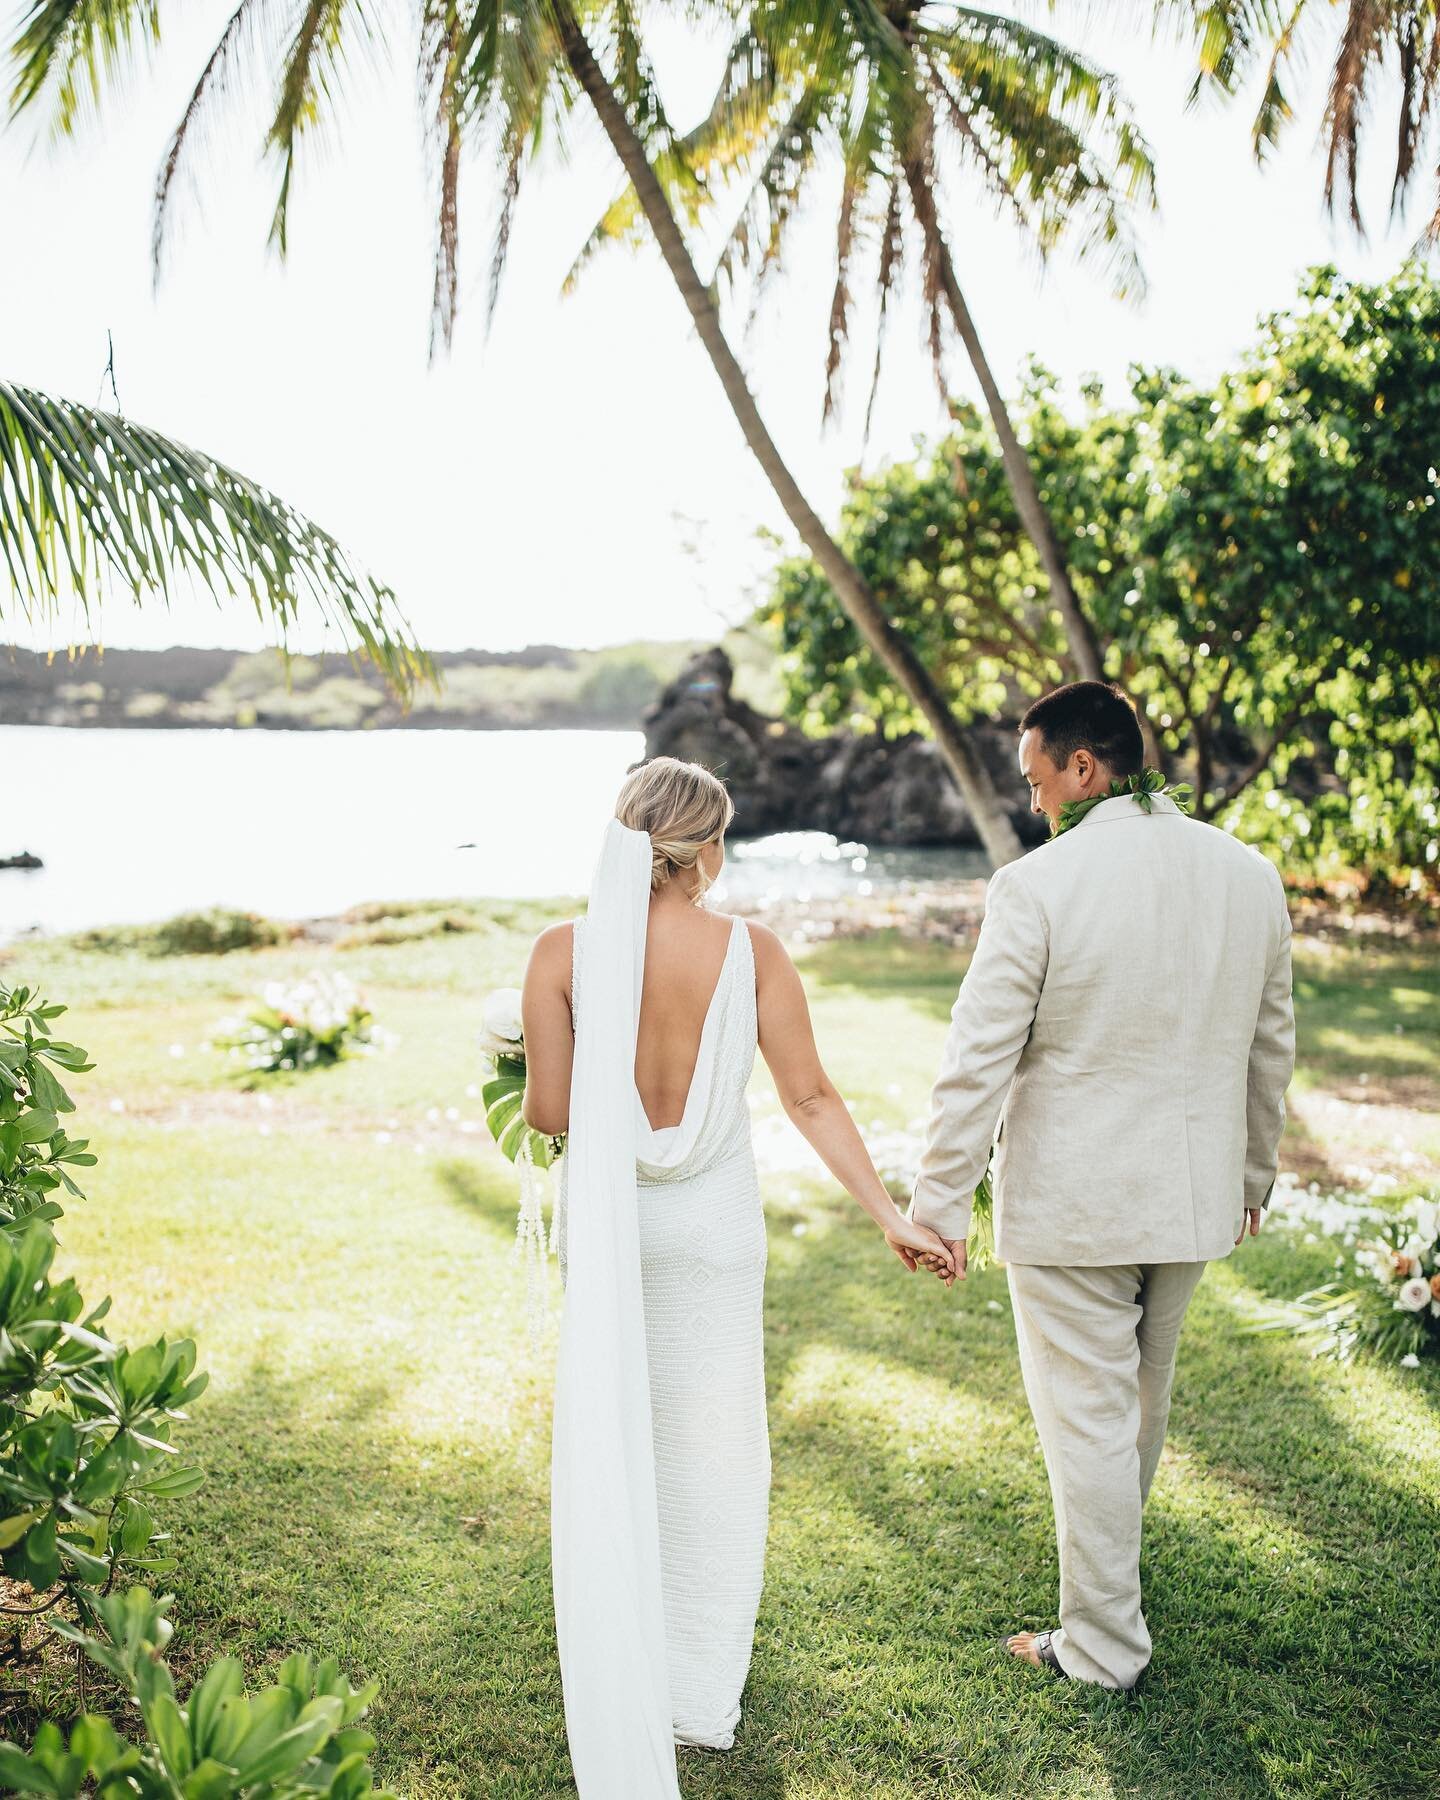 A beautiful Maui wedding a couple years ago. Curated with a lot of love and family &hellip;
&bull;
&bull;

#maui #destinationwedding #destinationweddings  #hawaii #weddingphotographer #elopementphotographer #elopement  #mauiphotographer #hawaiiphotog